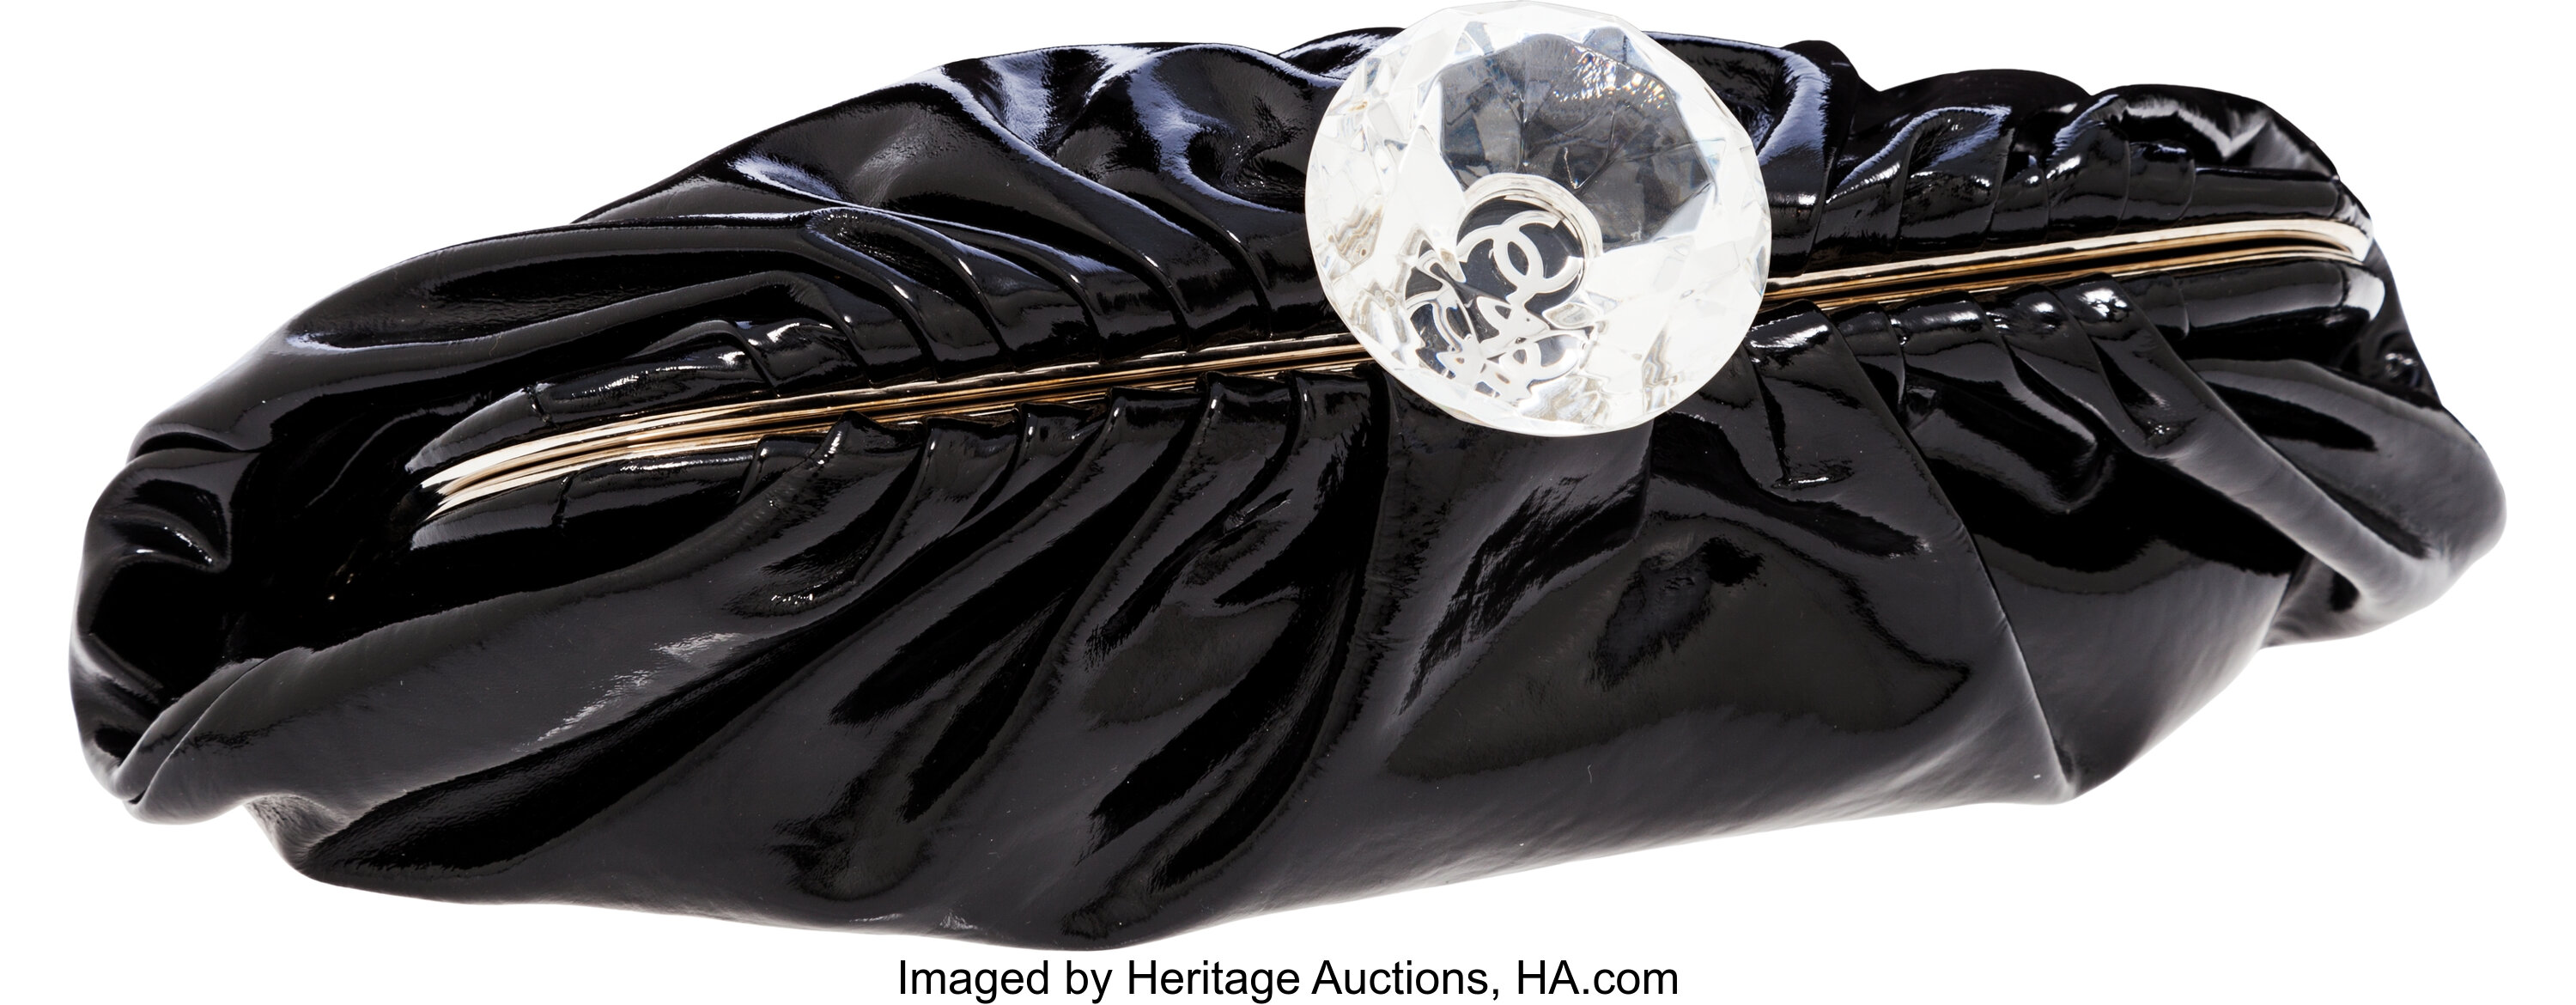 At Auction: Chanel Black Patent Leather CC Vanity Case